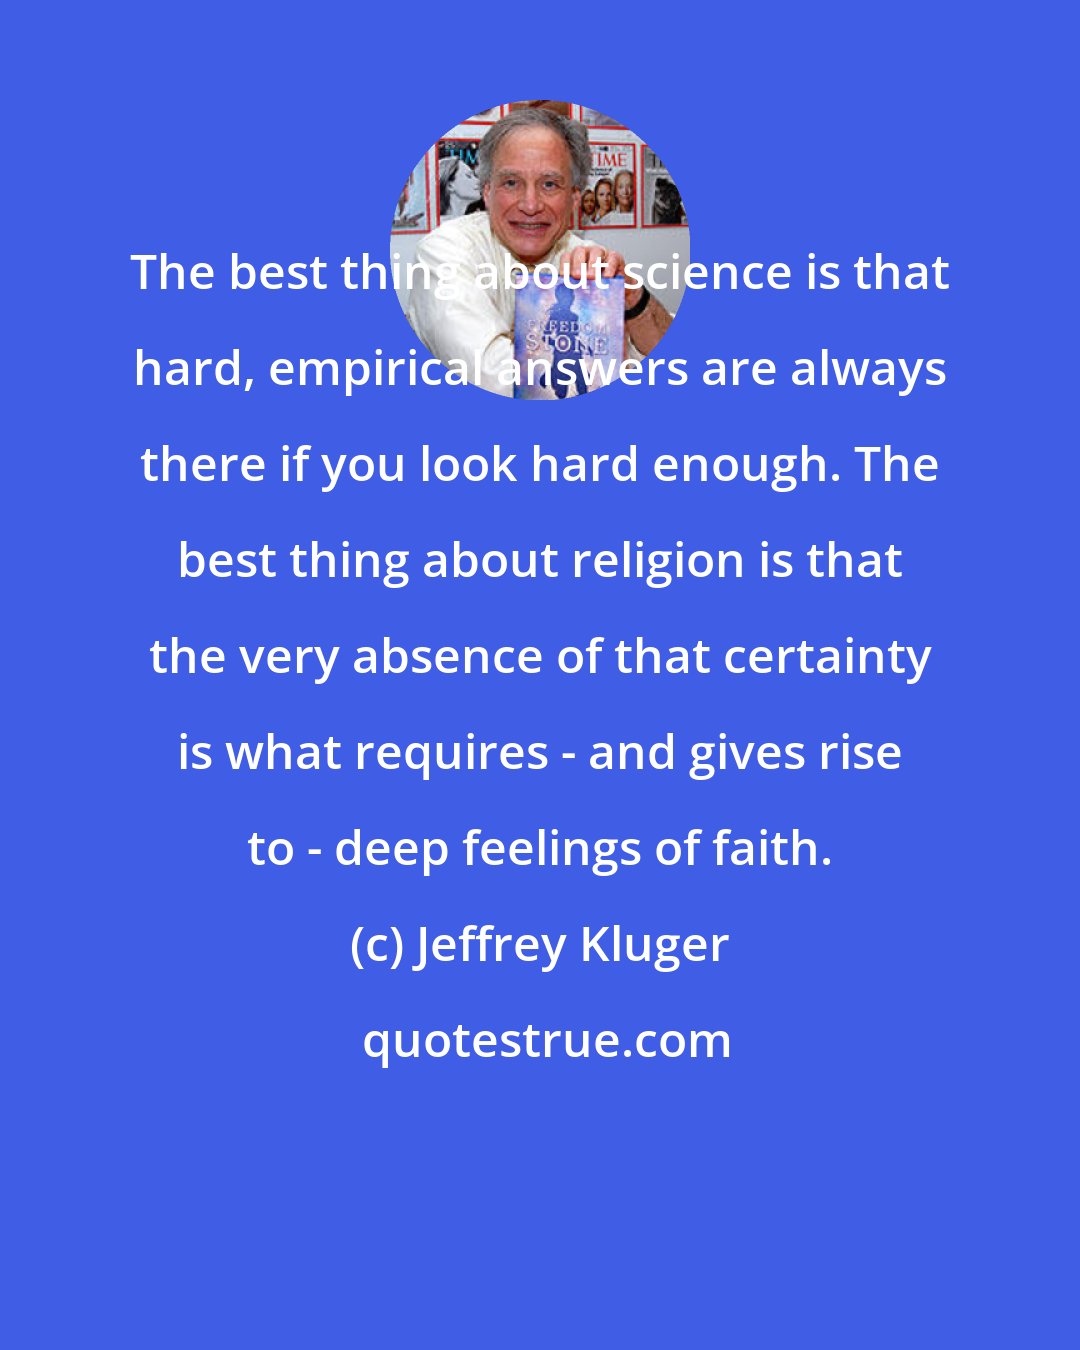 Jeffrey Kluger: The best thing about science is that hard, empirical answers are always there if you look hard enough. The best thing about religion is that the very absence of that certainty is what requires - and gives rise to - deep feelings of faith.